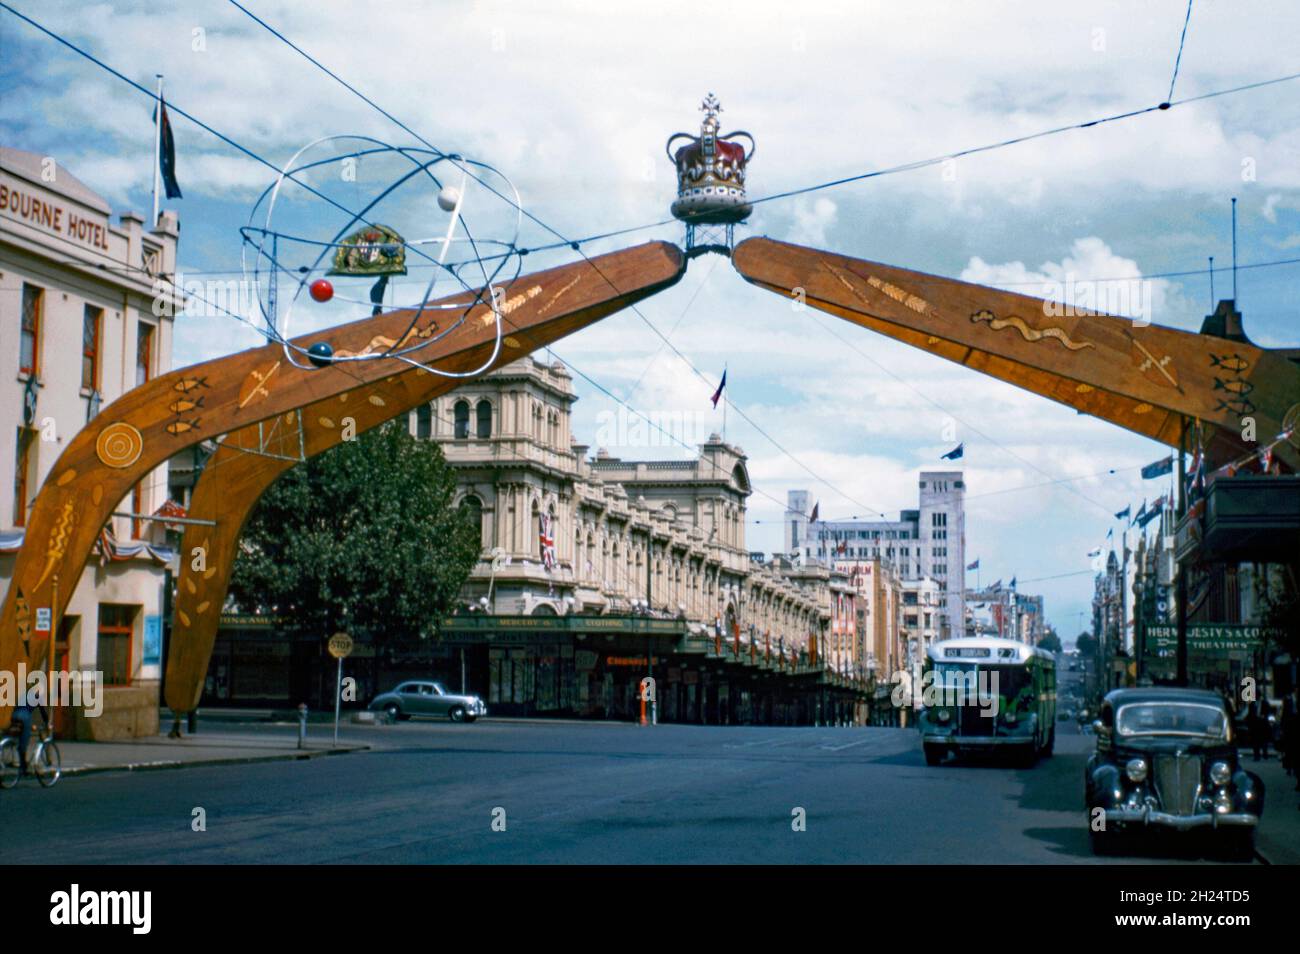 A commemorative arch in the shape of four boomerangs in Bourke Street, Melbourne, Victoria, Australia in 1954. It was erected to celebrate the Royal visit of Queen Elizabeth II on her Coronation Tour of the country. The imposing arch has an interesting design, with indigenous Aboriginal art topped with the royal crown (it would probably not be politically correct to mix the two in that way today). In front is an ‘atomic’ style hanging sculpture/mobile. The same arch was first used in Sydney for the Queen’s visit to that city. It was then swiftly moved to Melbourne – a vintage 1950s photograph. Stock Photo